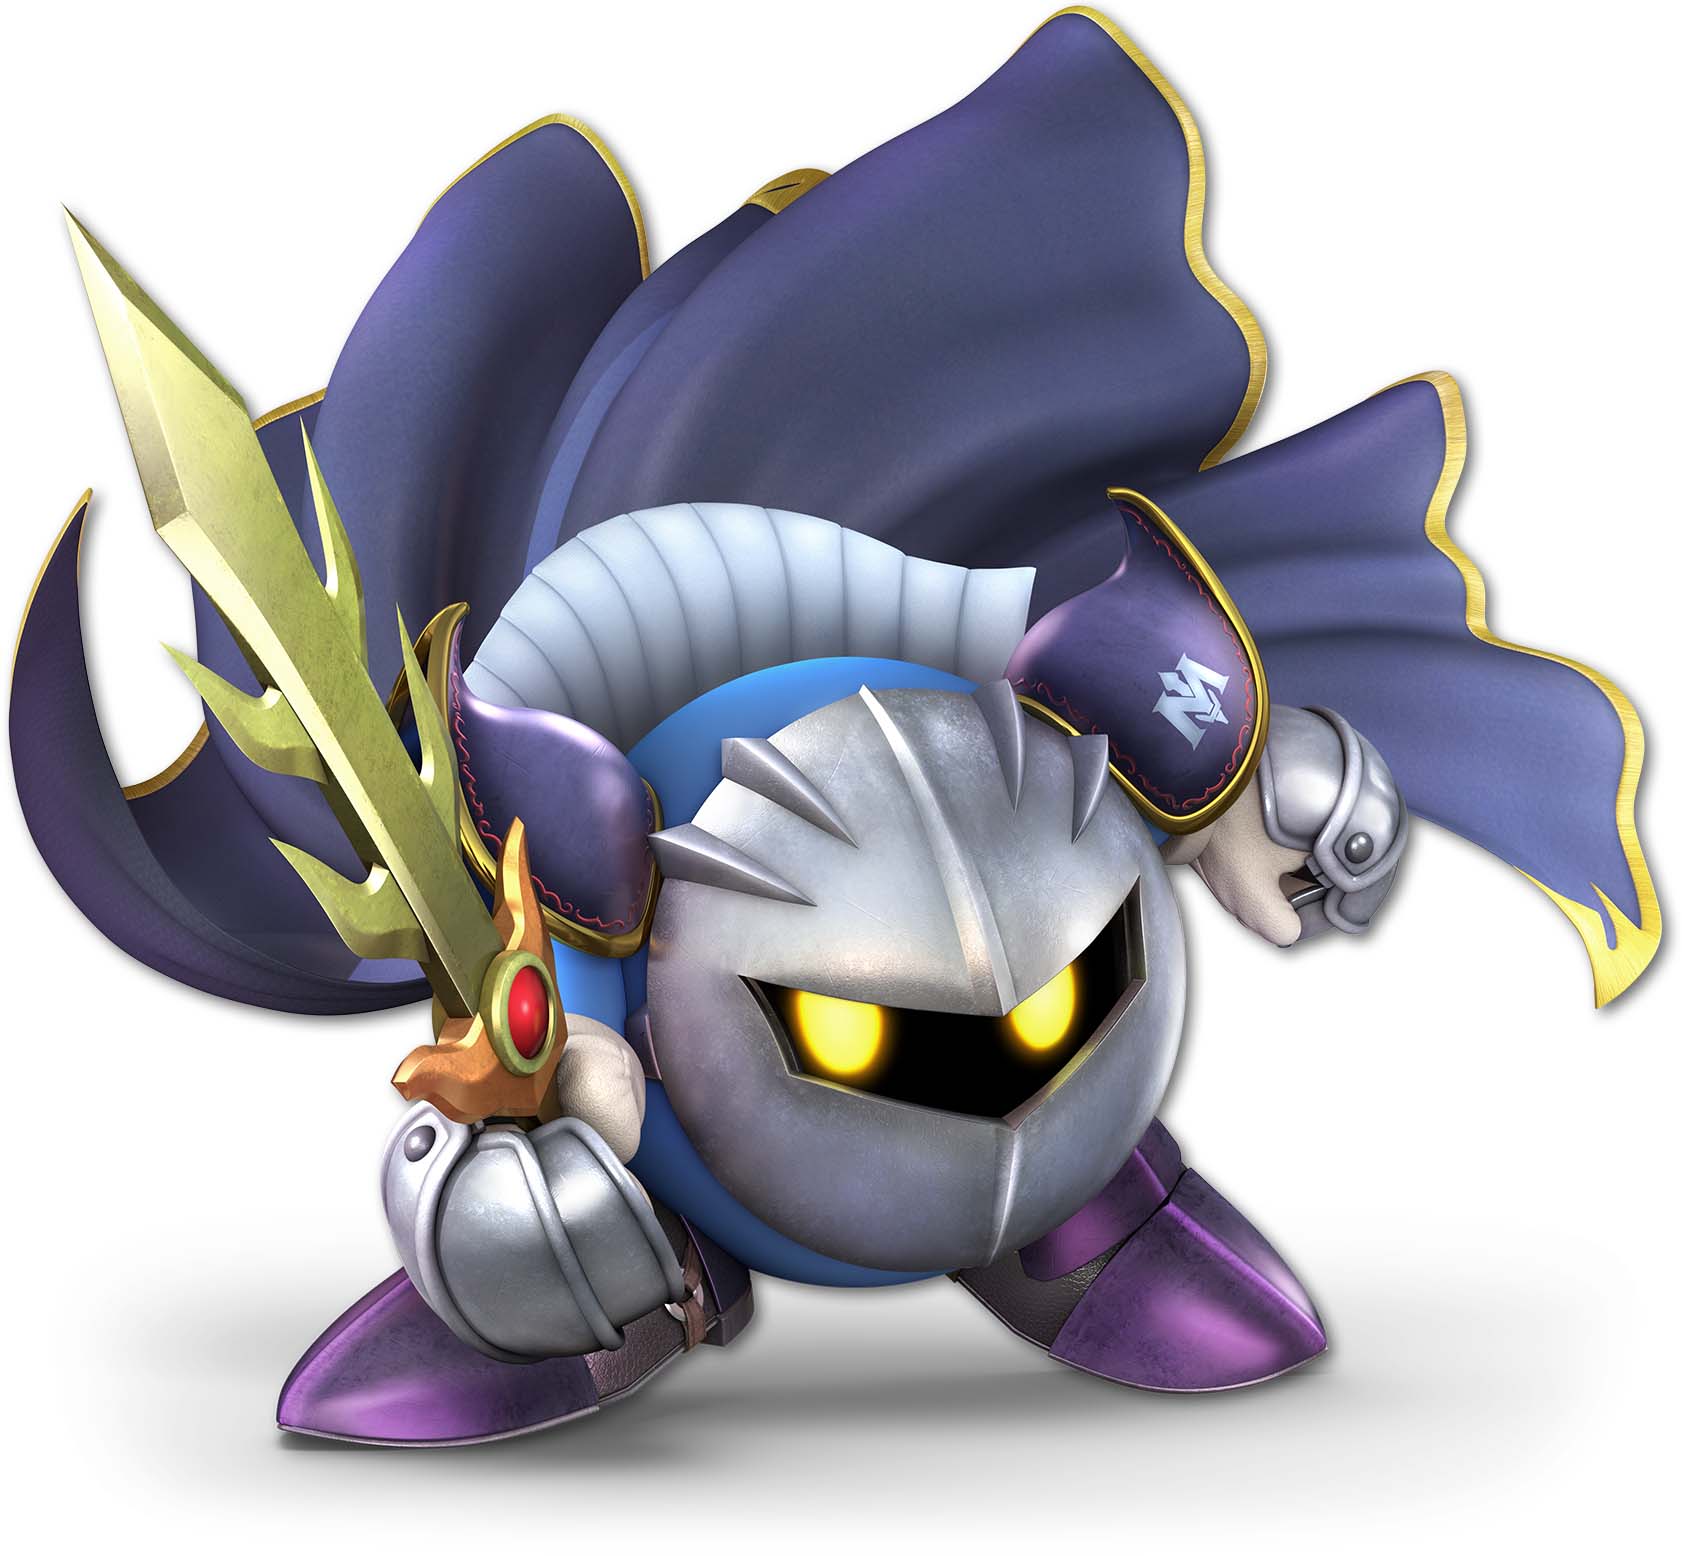 Super Smash Bros. Ultimate Meta Knight. Select this character for for counters, counter tips, and more!